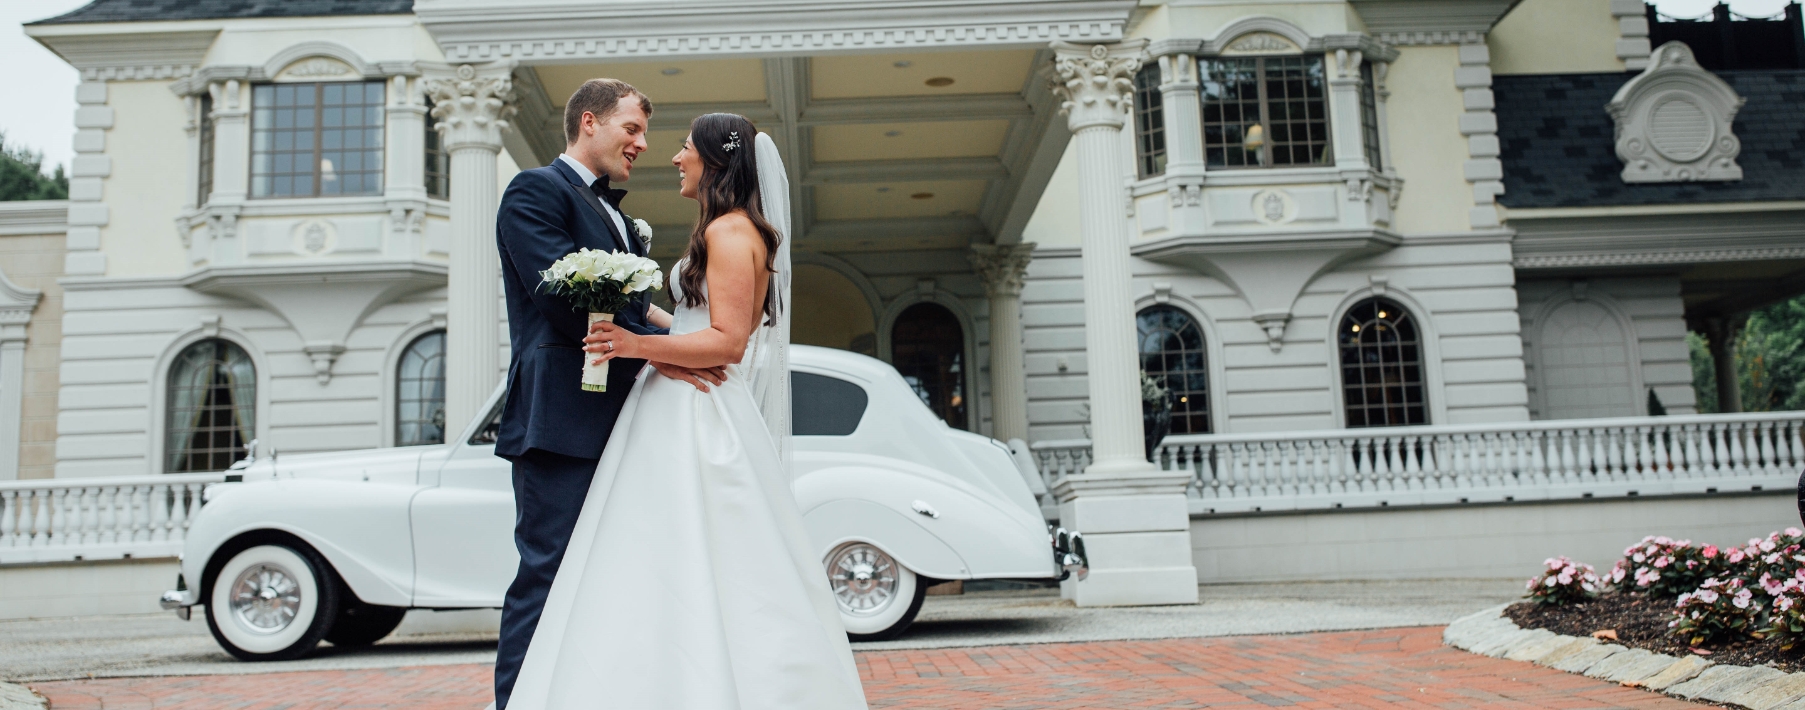 “It was magical!  The most perfect day!  Your staff was amazing! 